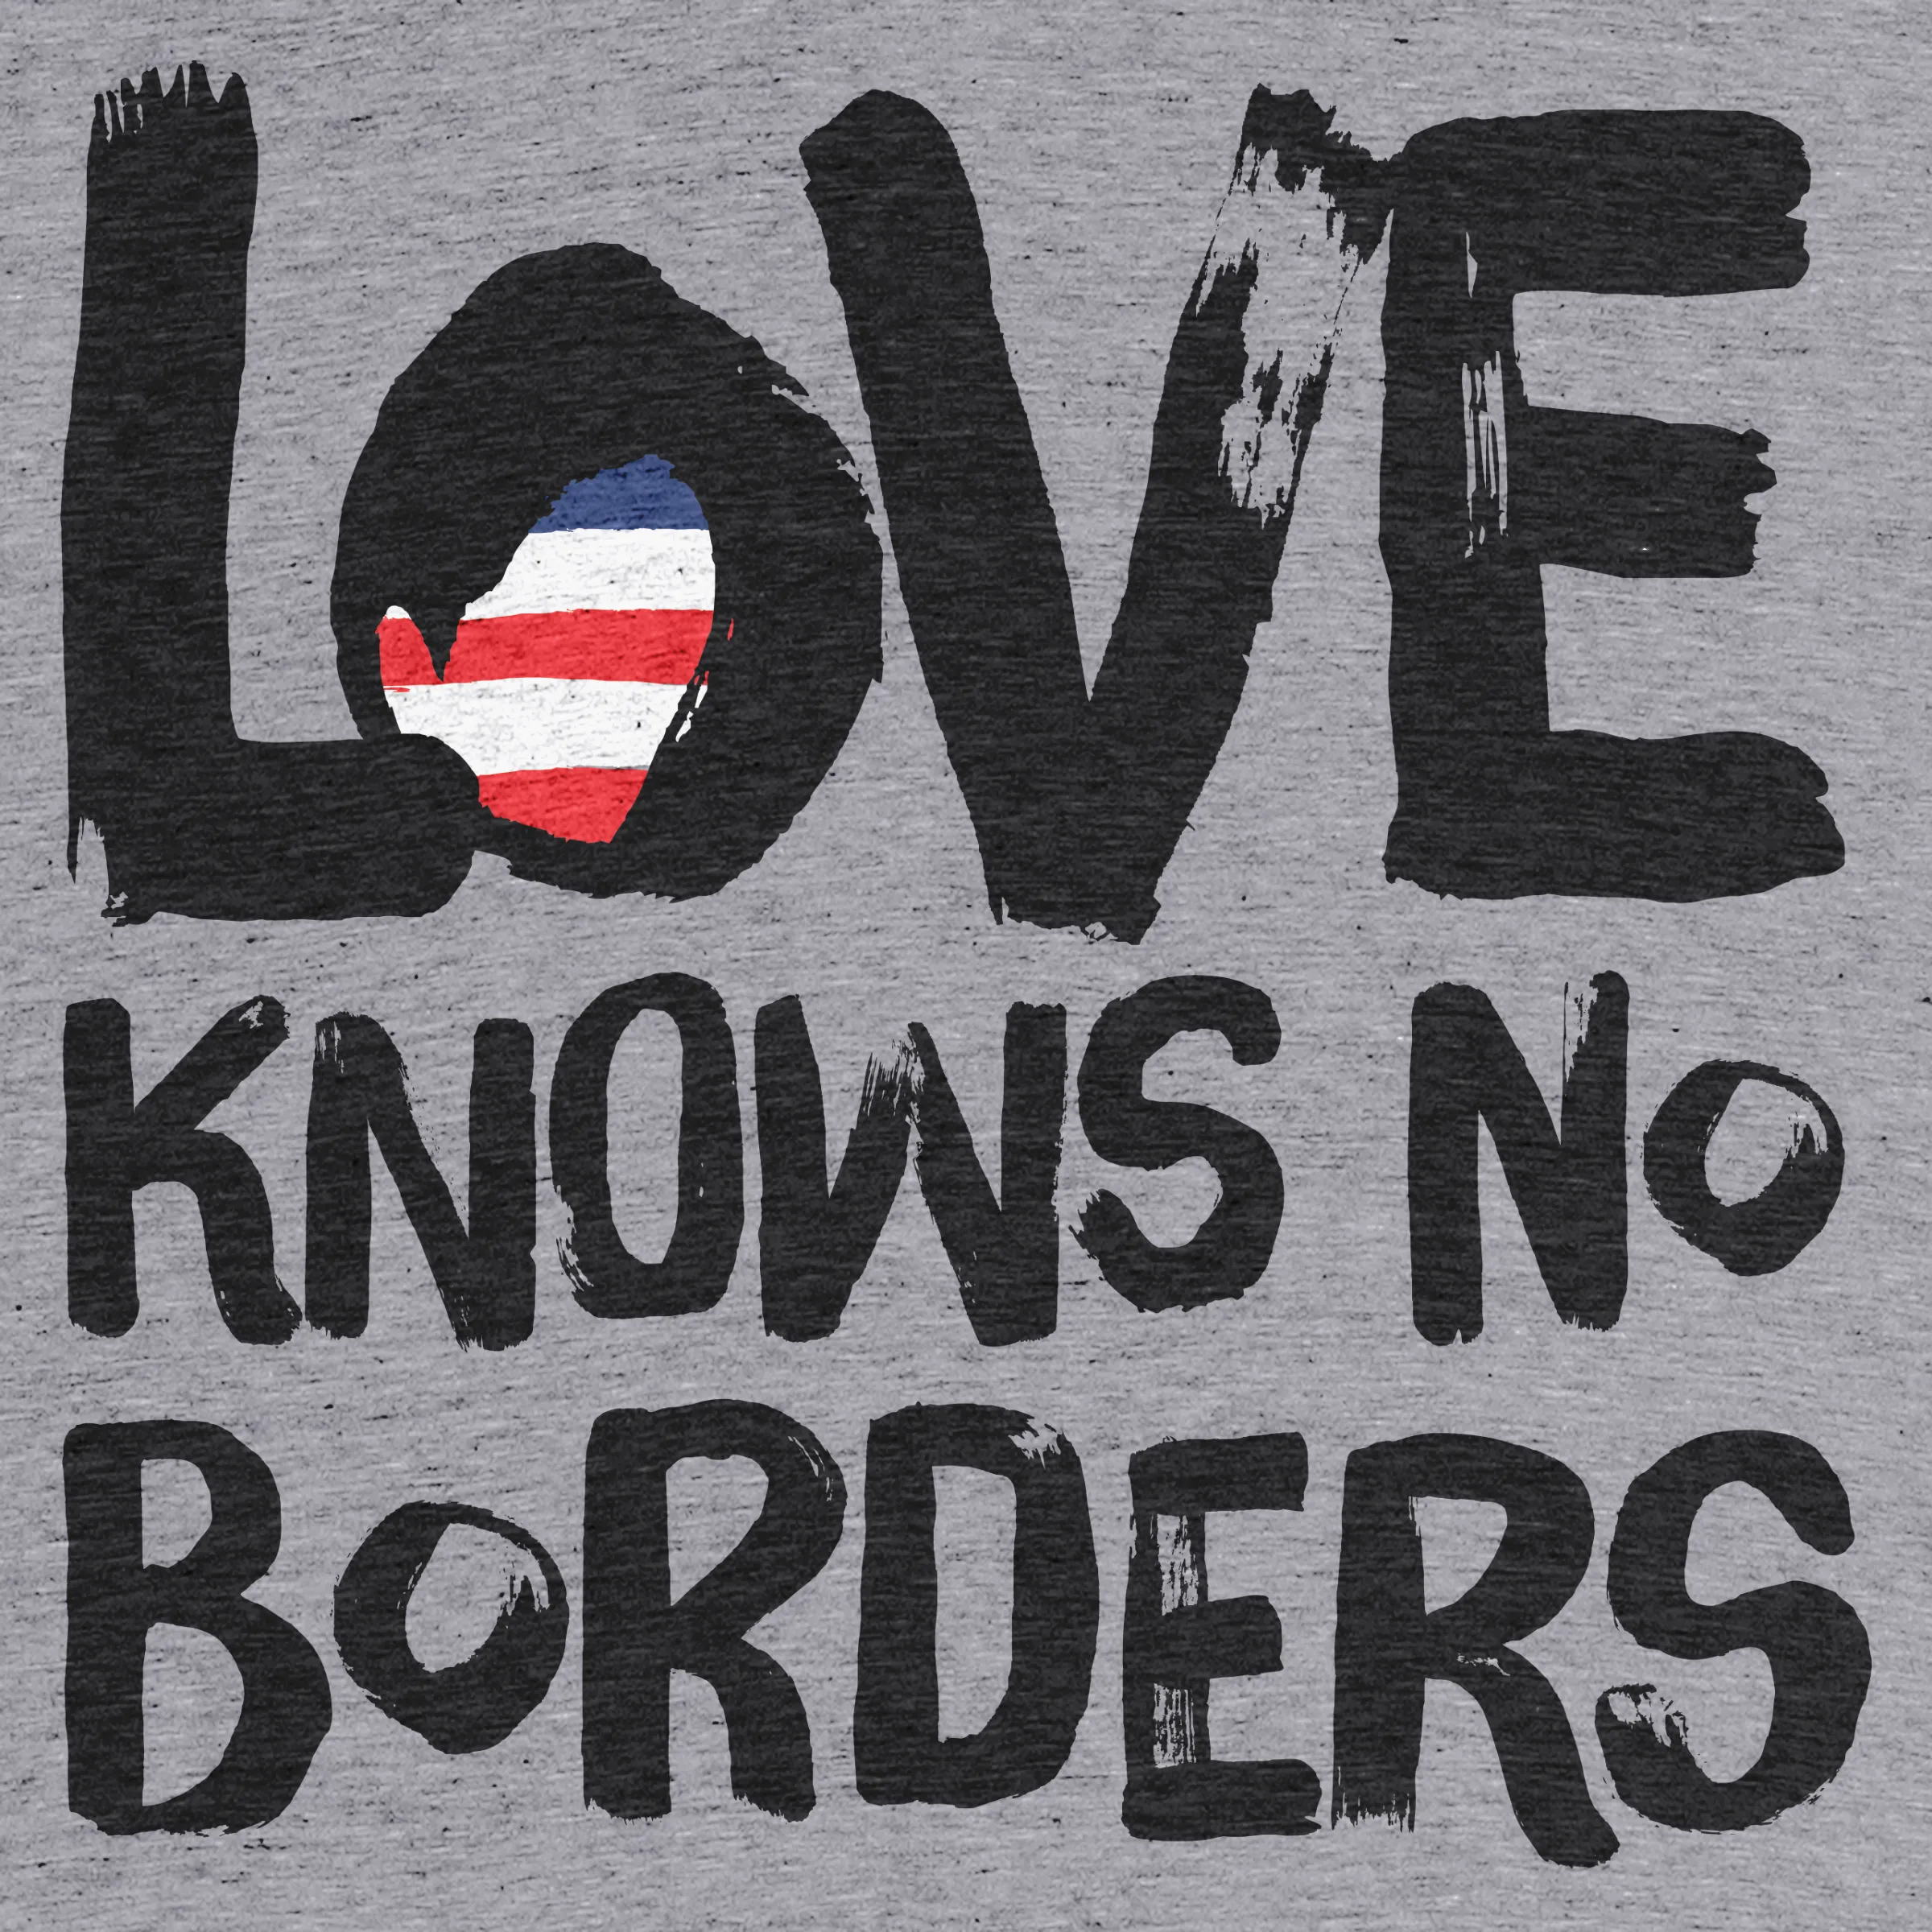 Love Knows No Boundaries Merch & Gifts for Sale